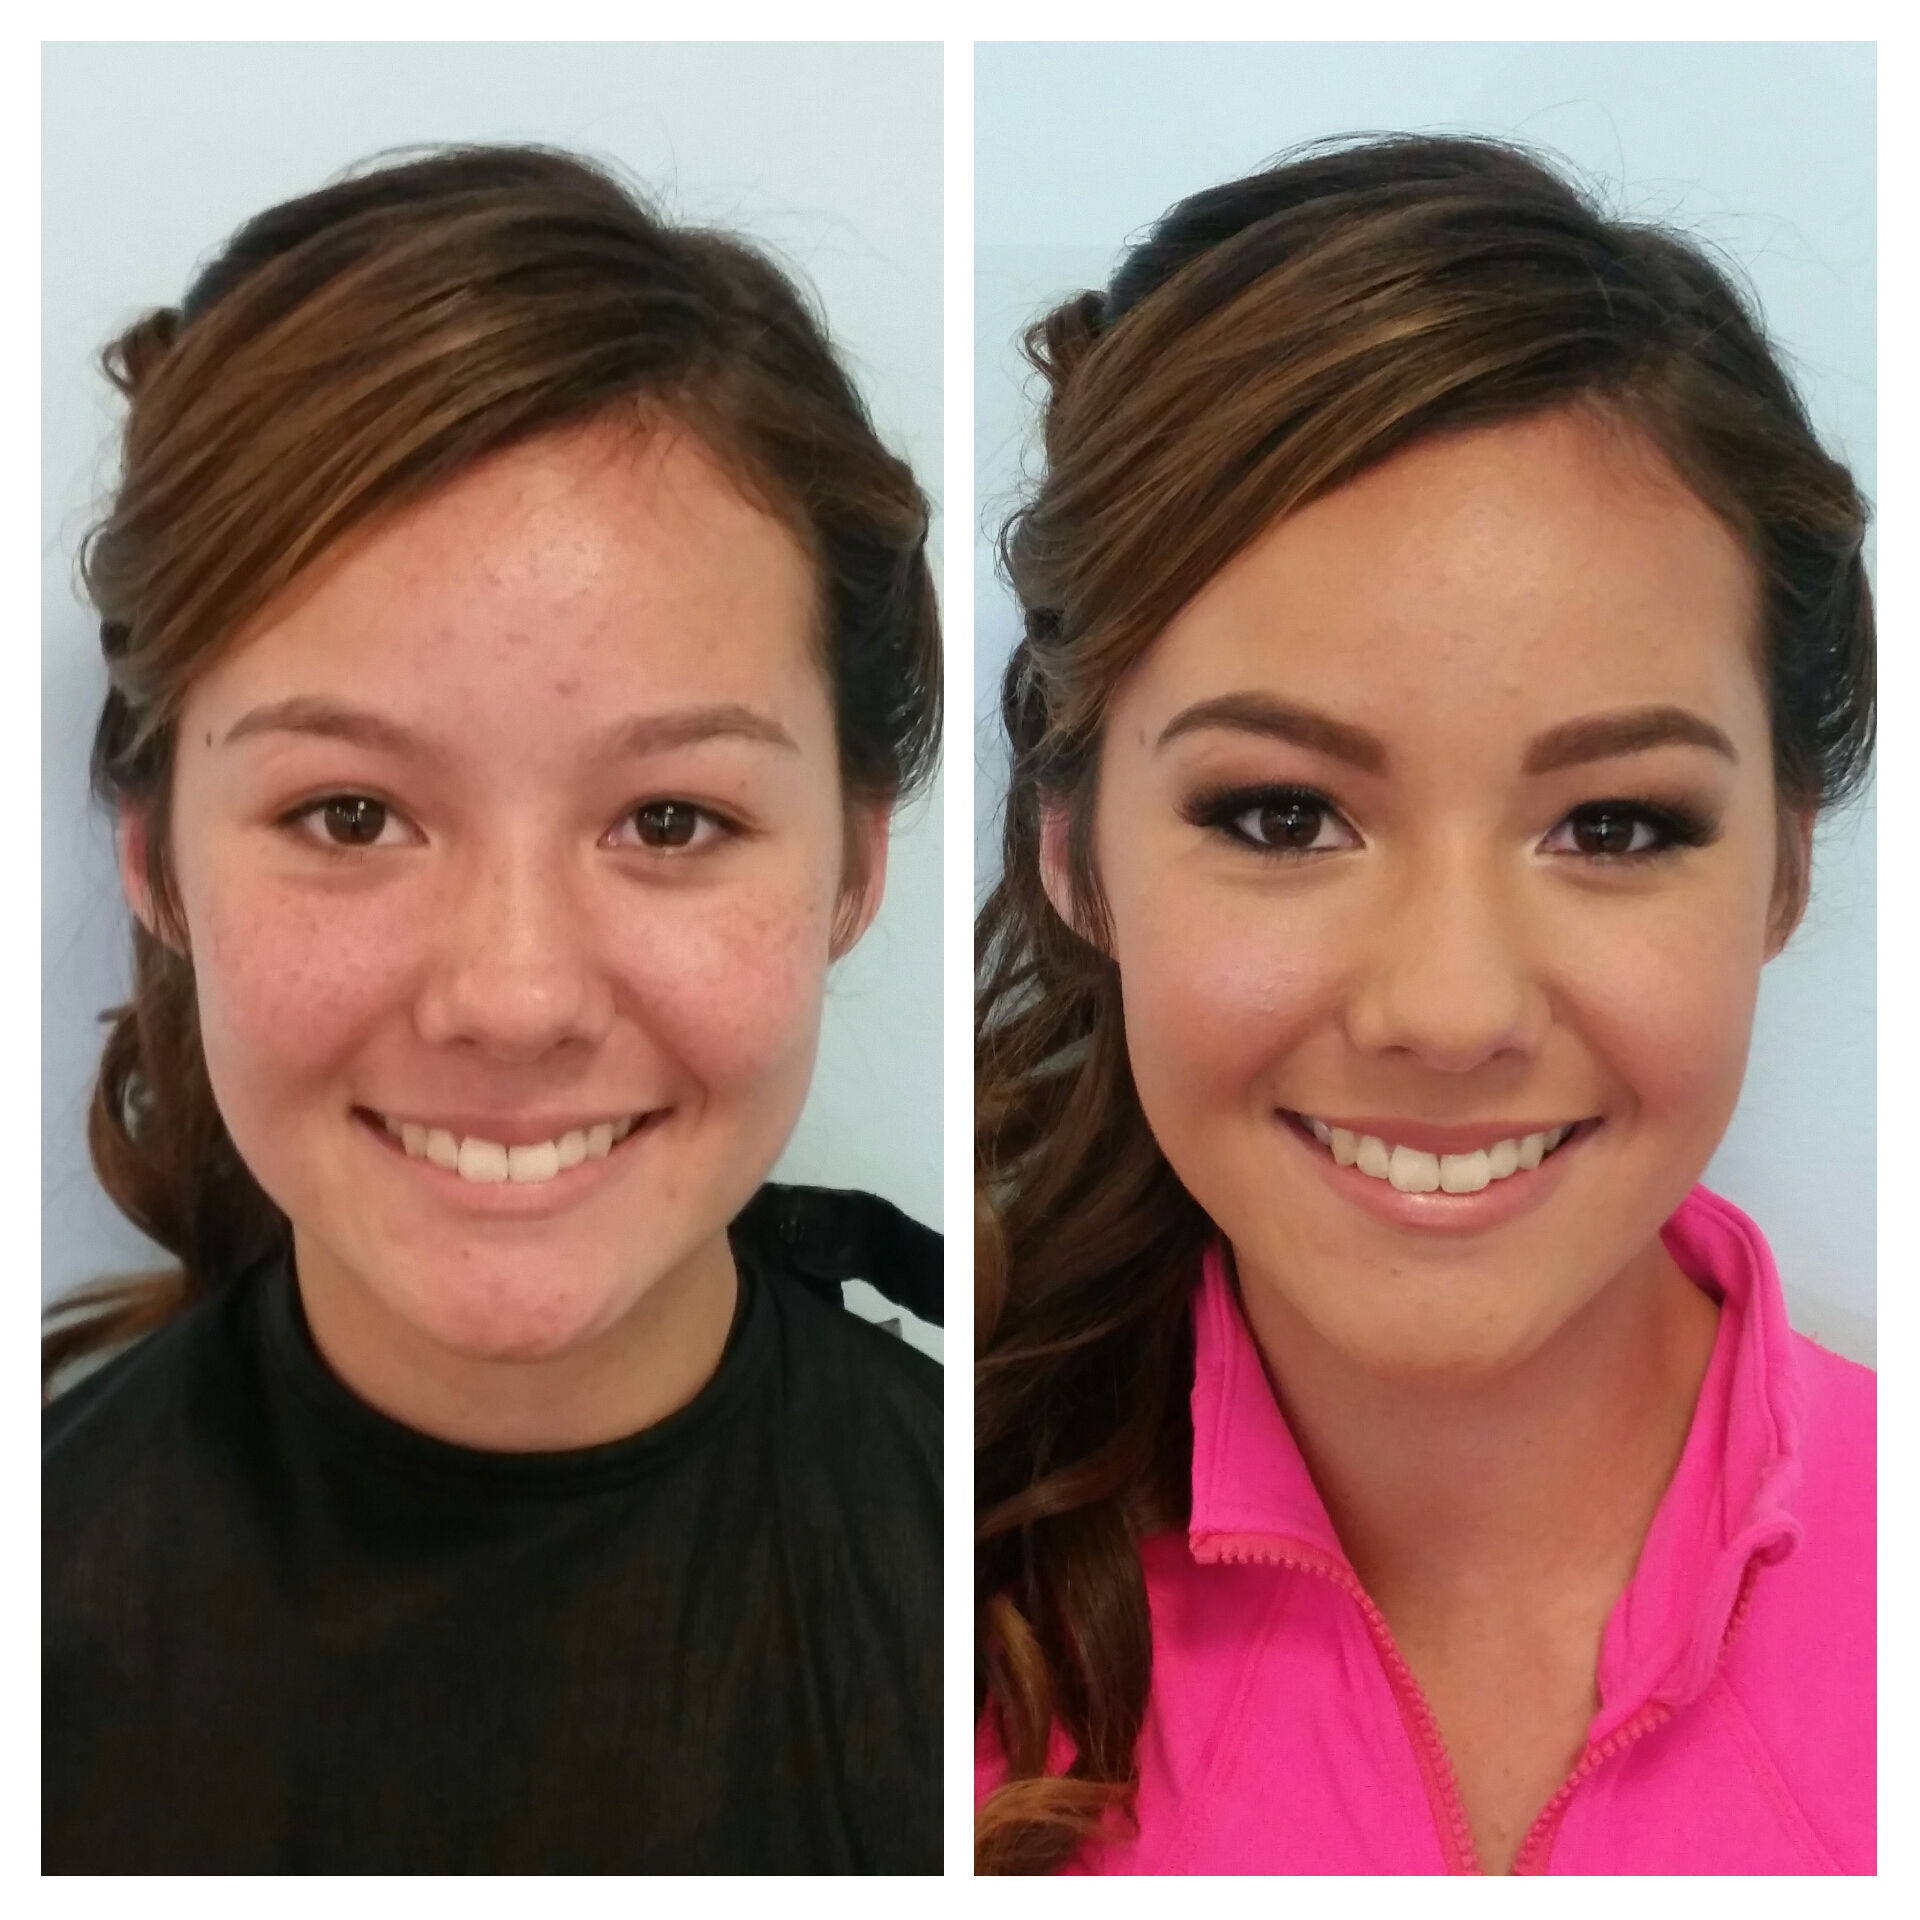 Sophistocated Homecoming Makeup Application with Airbrush and False Lashes by Luminous Beauty Makeup Artist.jpg